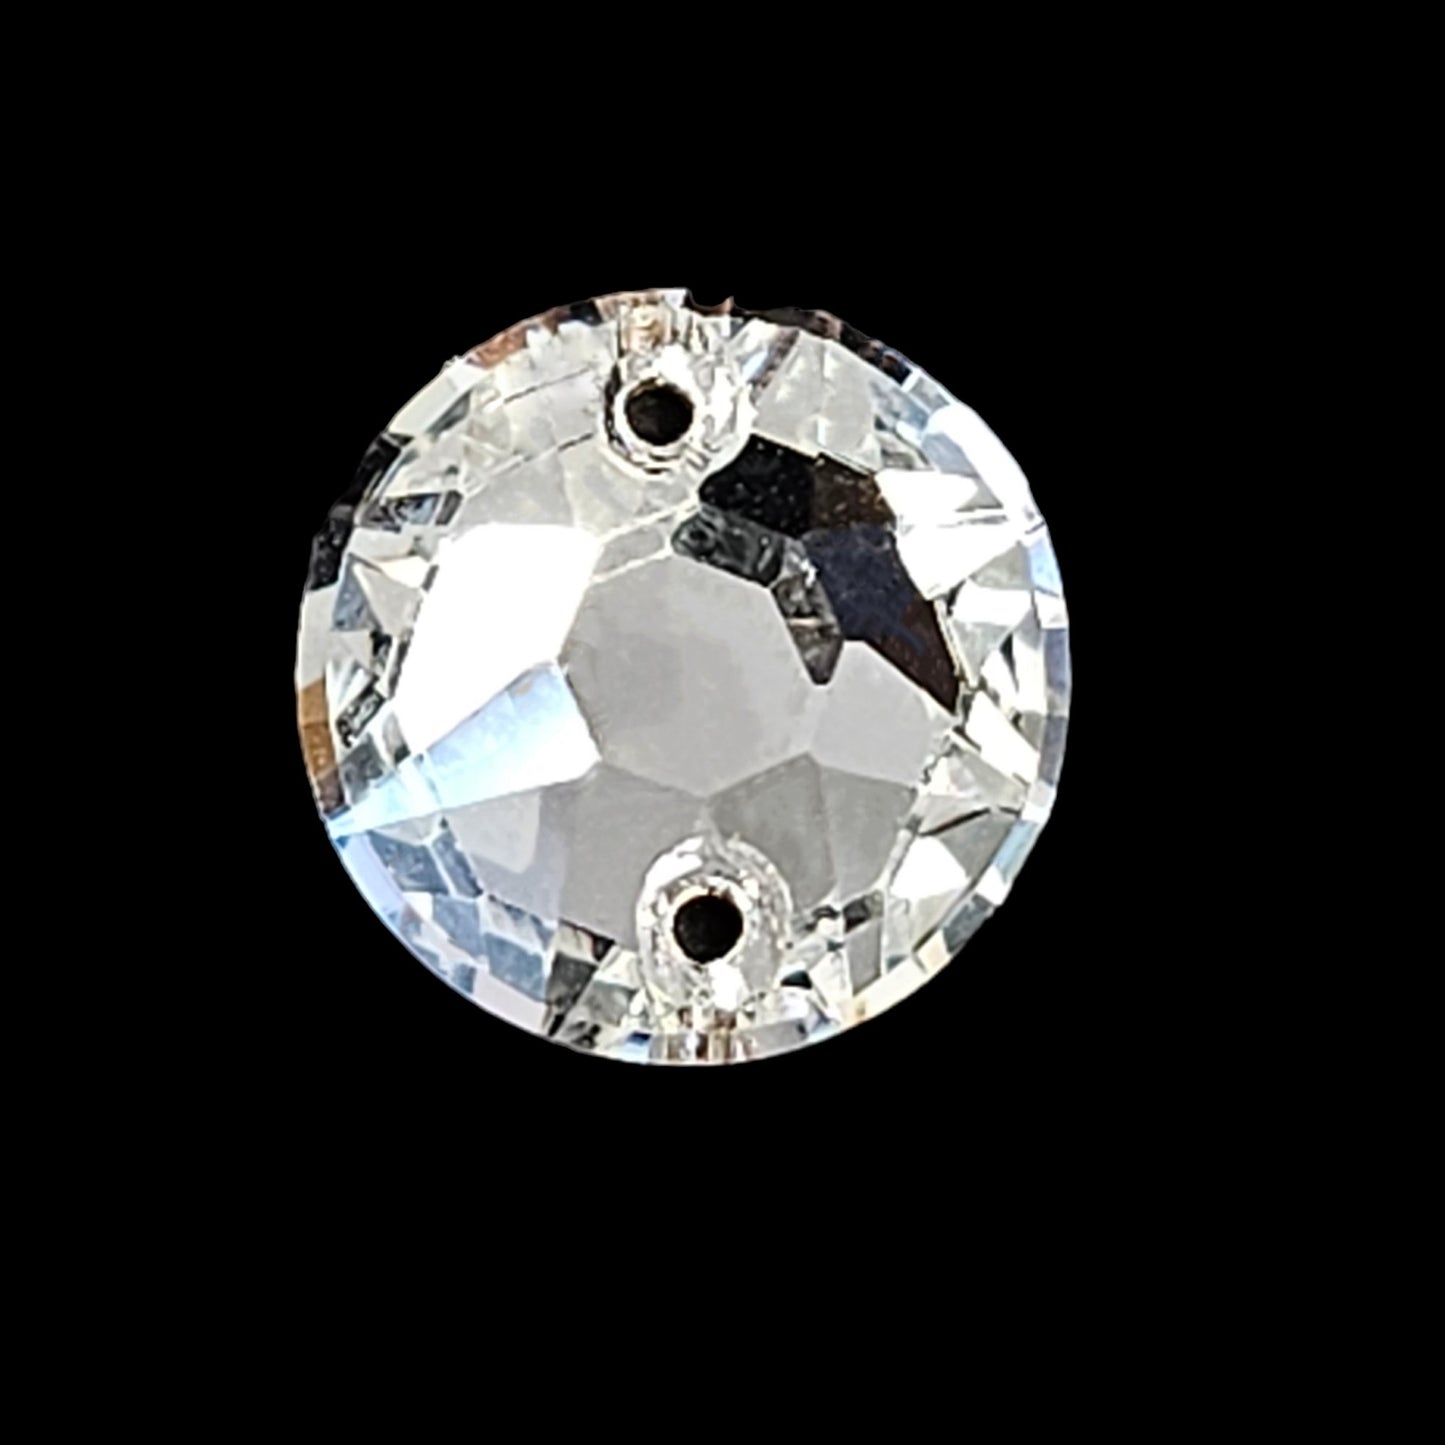 Fancy LUXE Glass Crystal XIRIUS SHAPED Sew On Rhinestones - Crystal Xirius Sew On Rhinestones - Sew On Rhinestones - Xirius